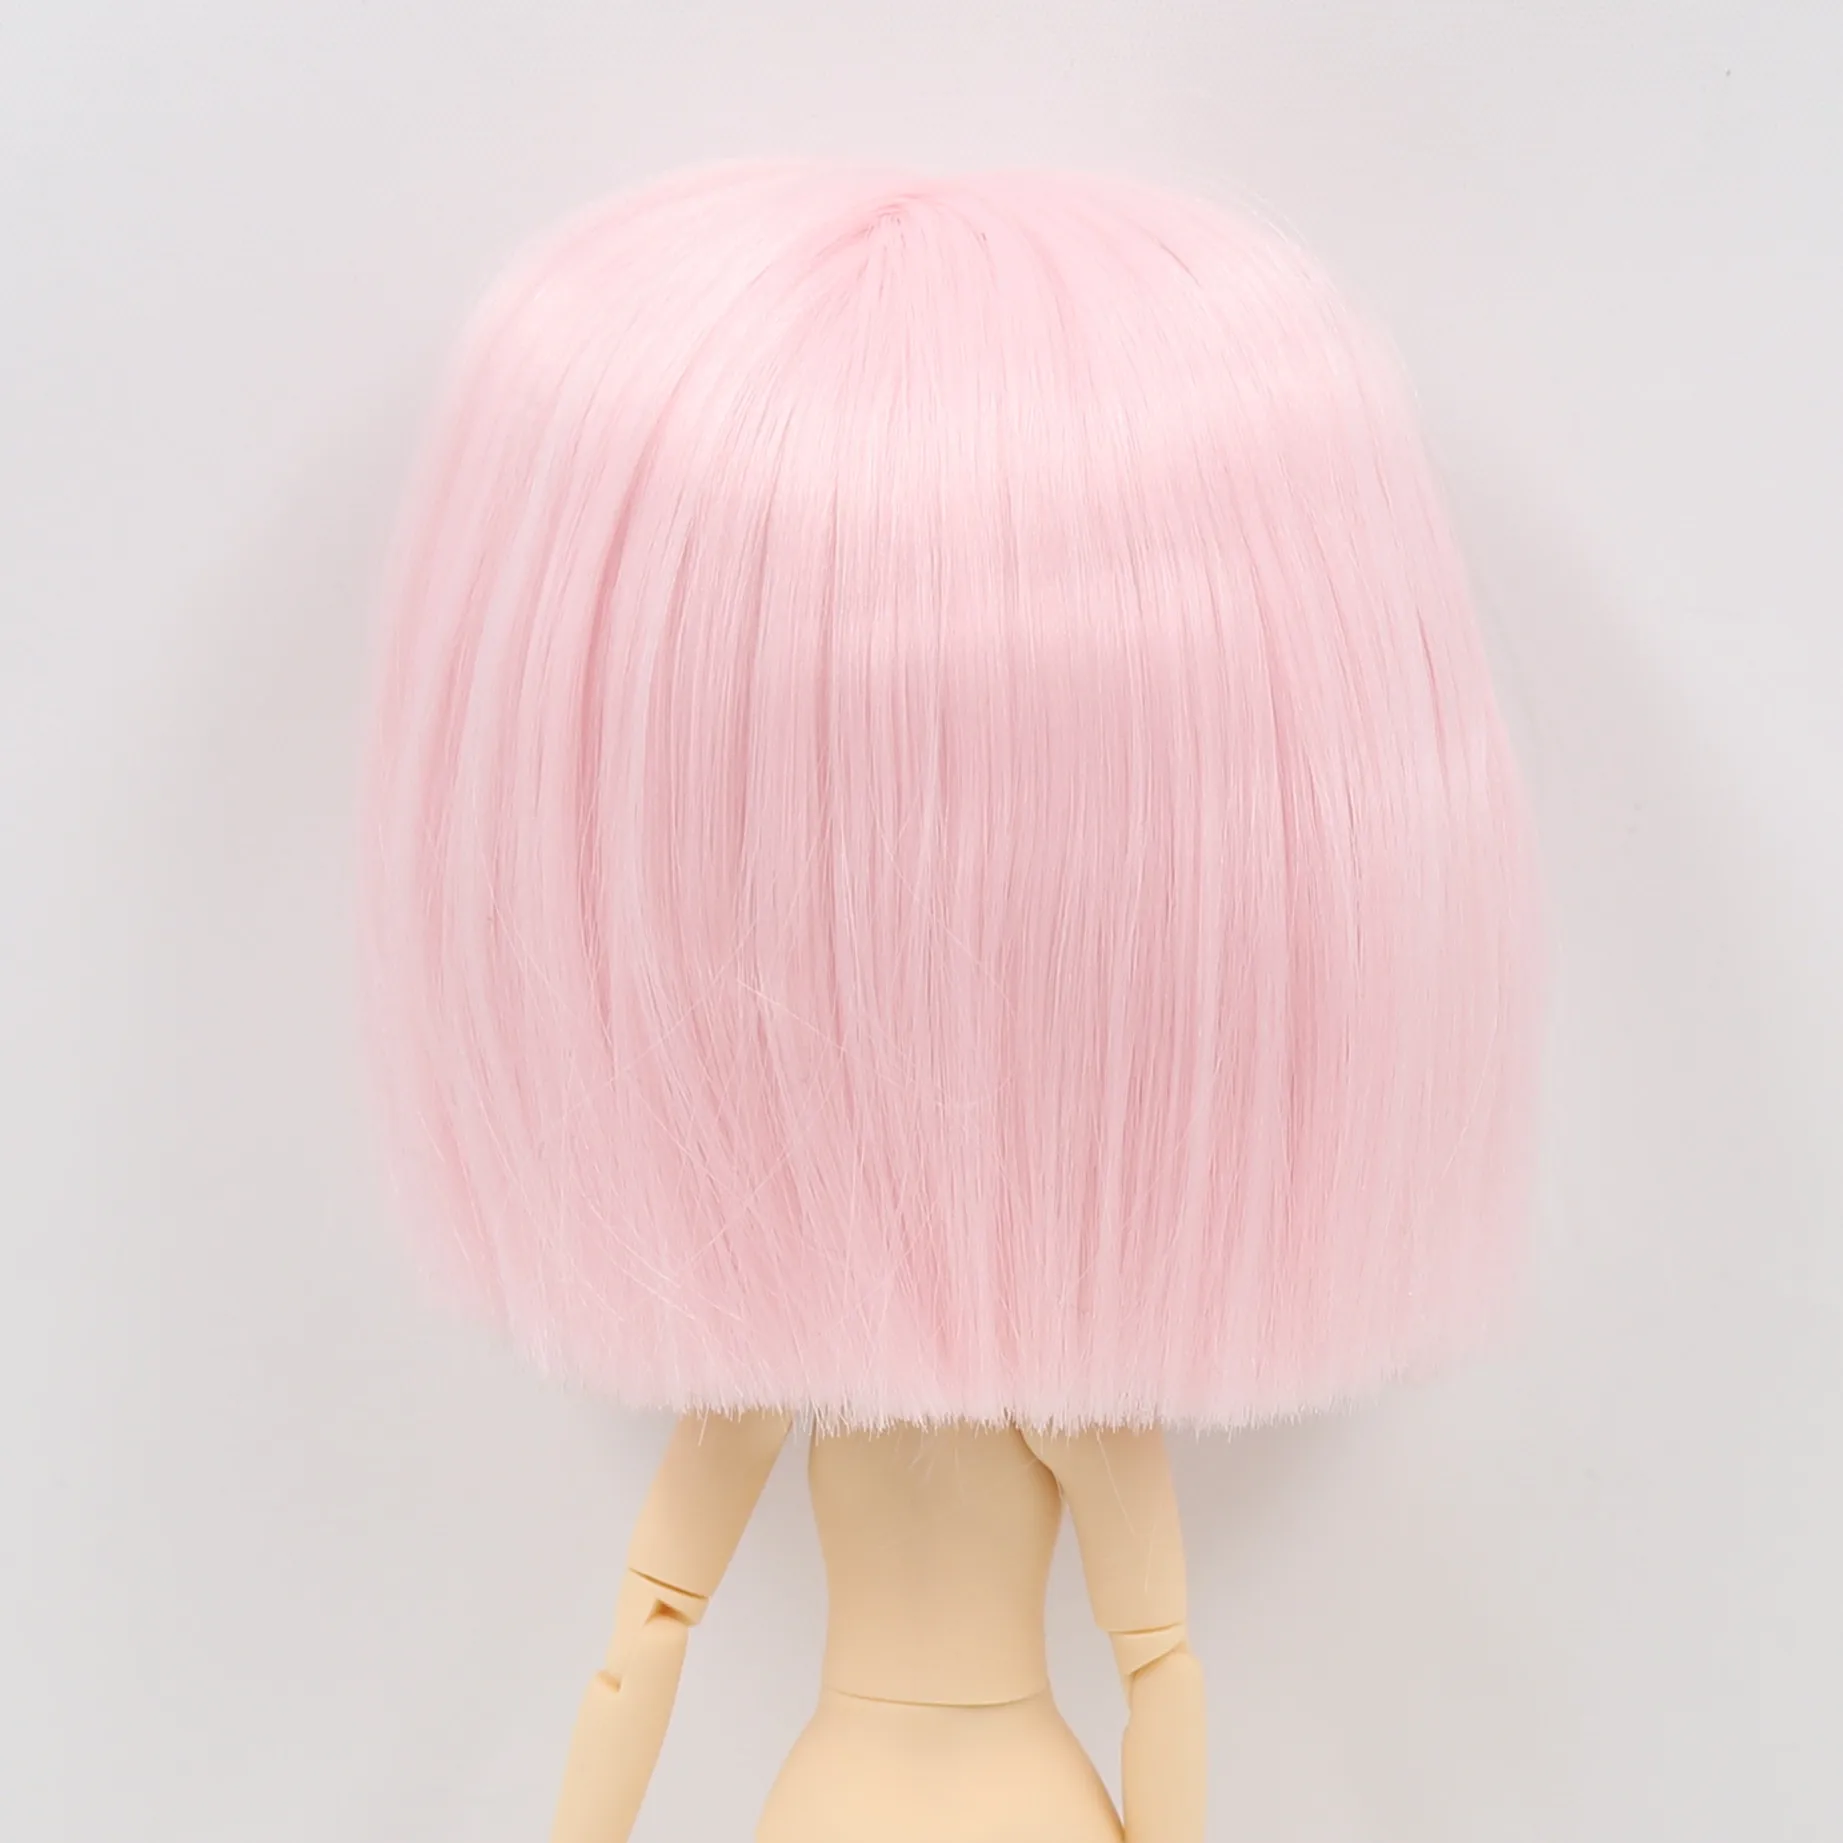 Middie Blythe Doll Hair Premium Pink Wig With Scalp Dome 1